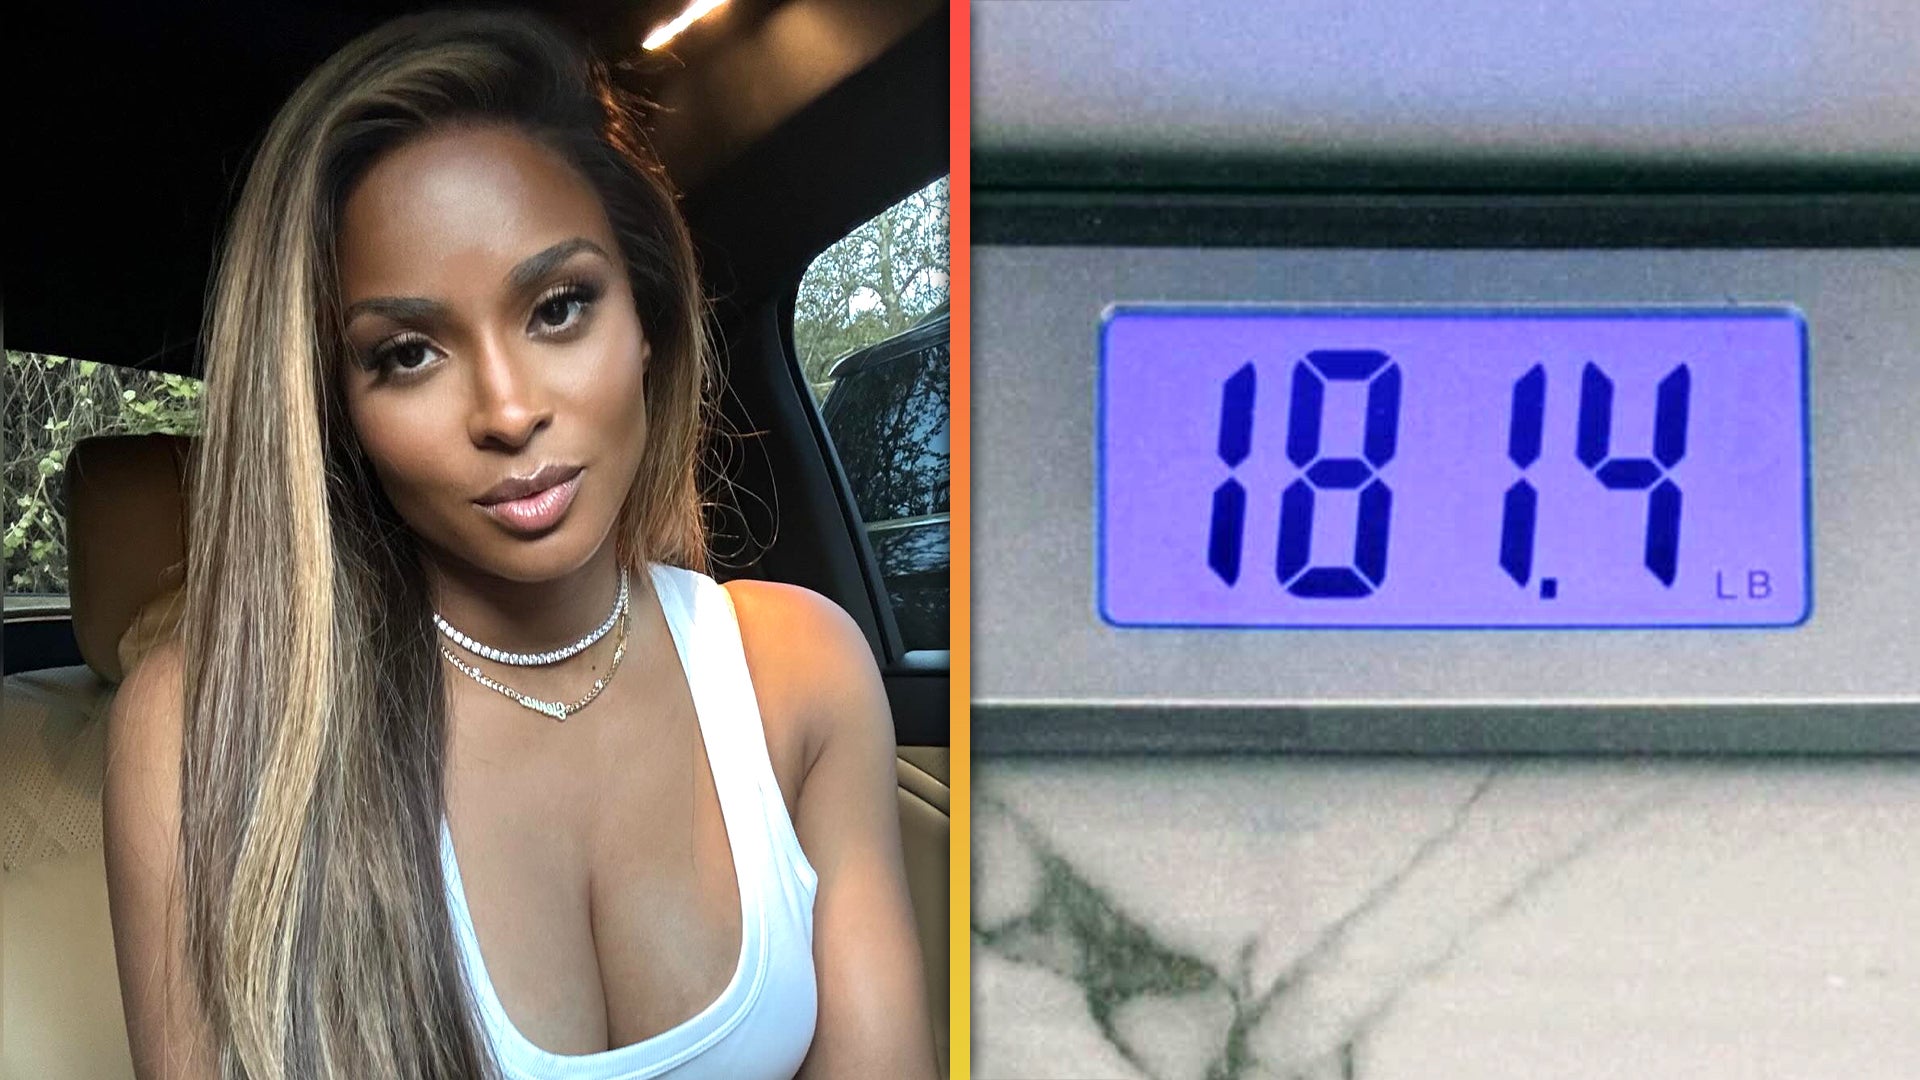 Ciara Shares Photo of Scale After Declaring She's Trying to Lose 70 Pounds